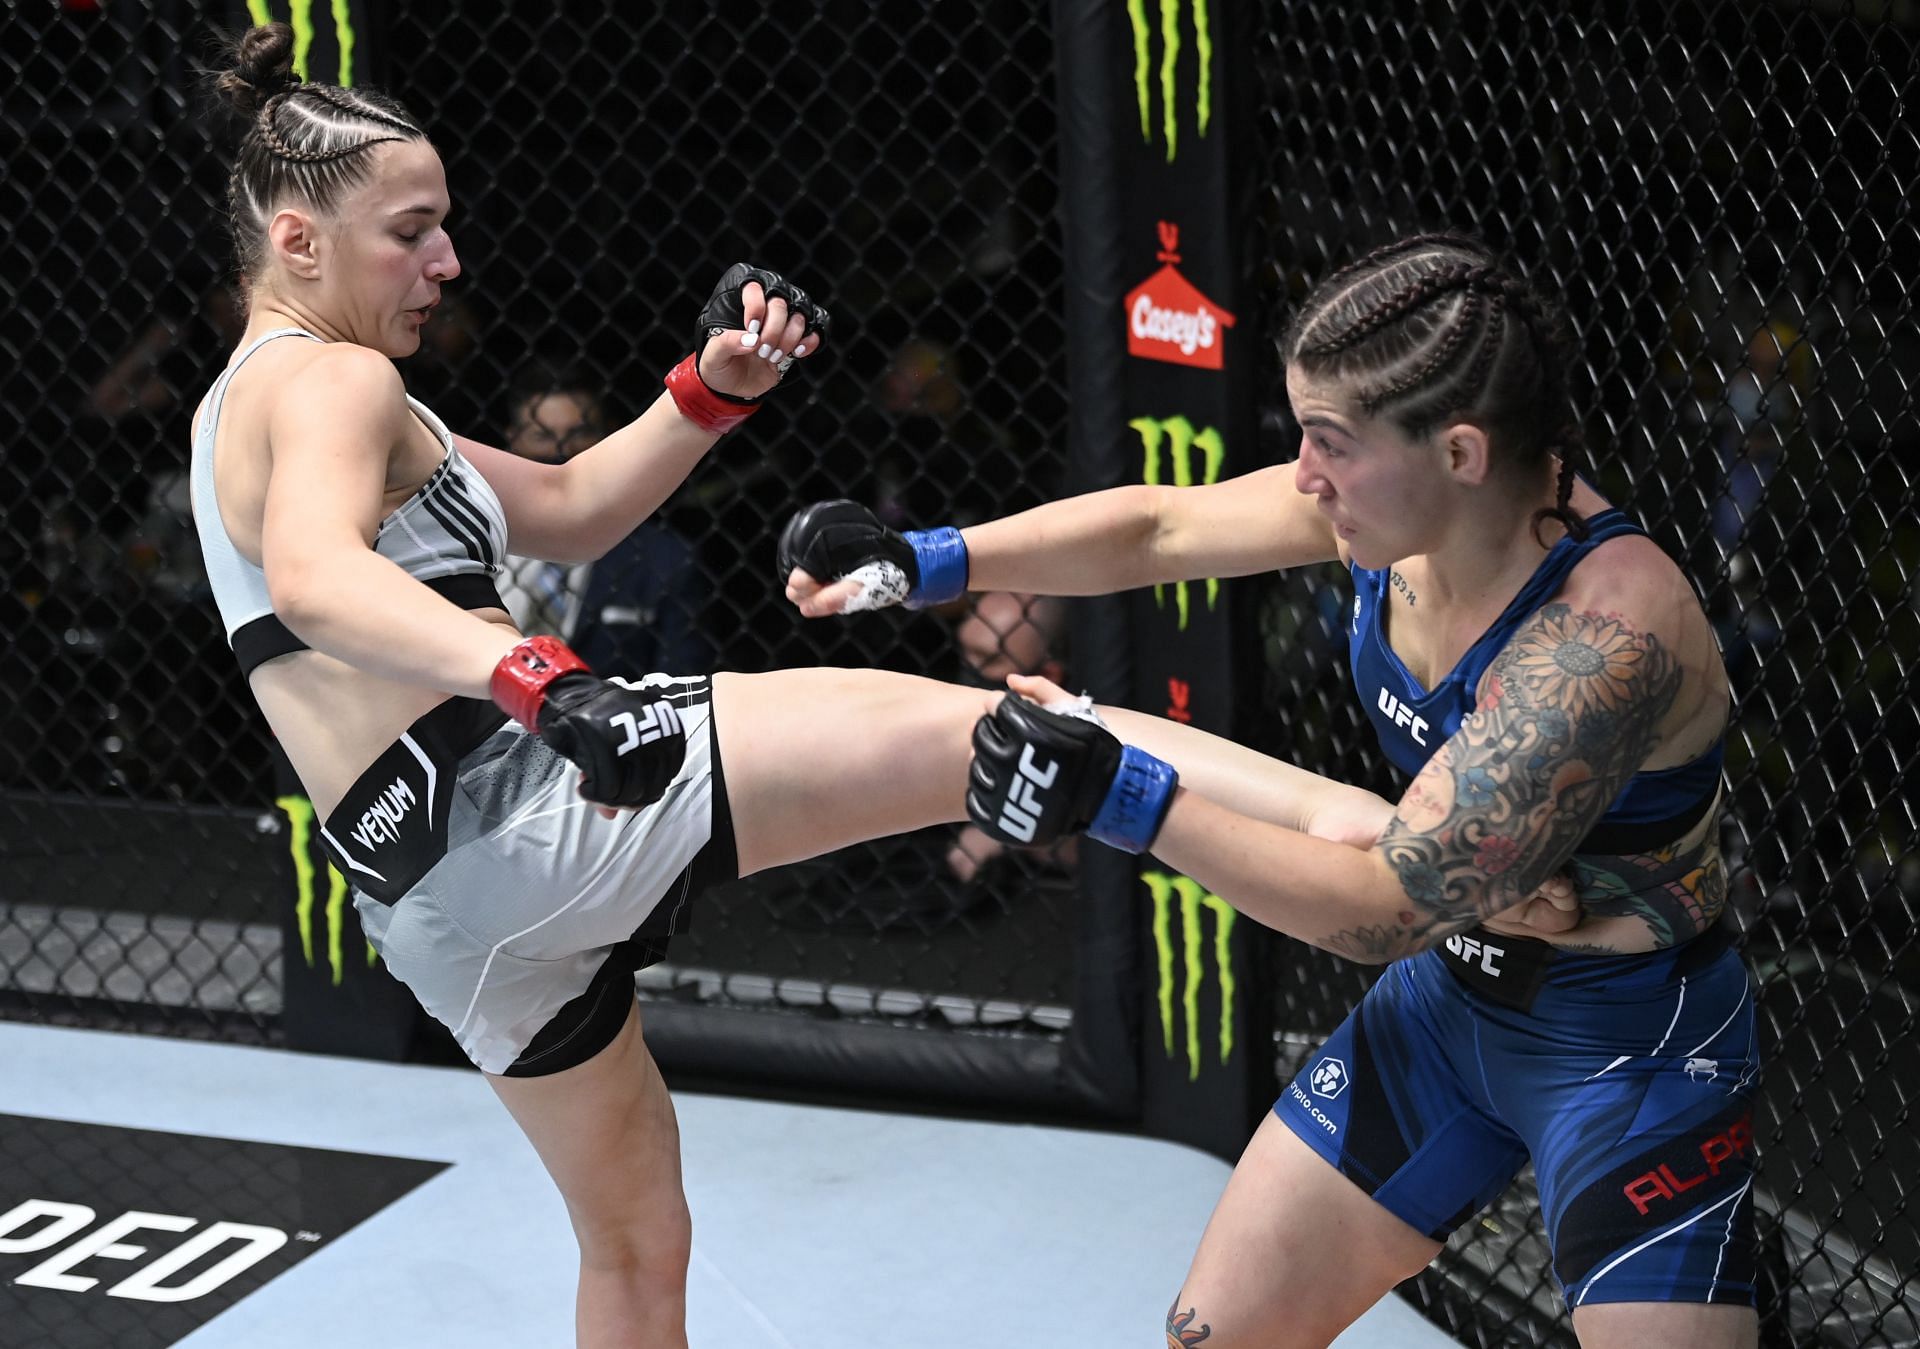 Could prospect Erin Blanchfield step in to face Miesha Tate on late notice?